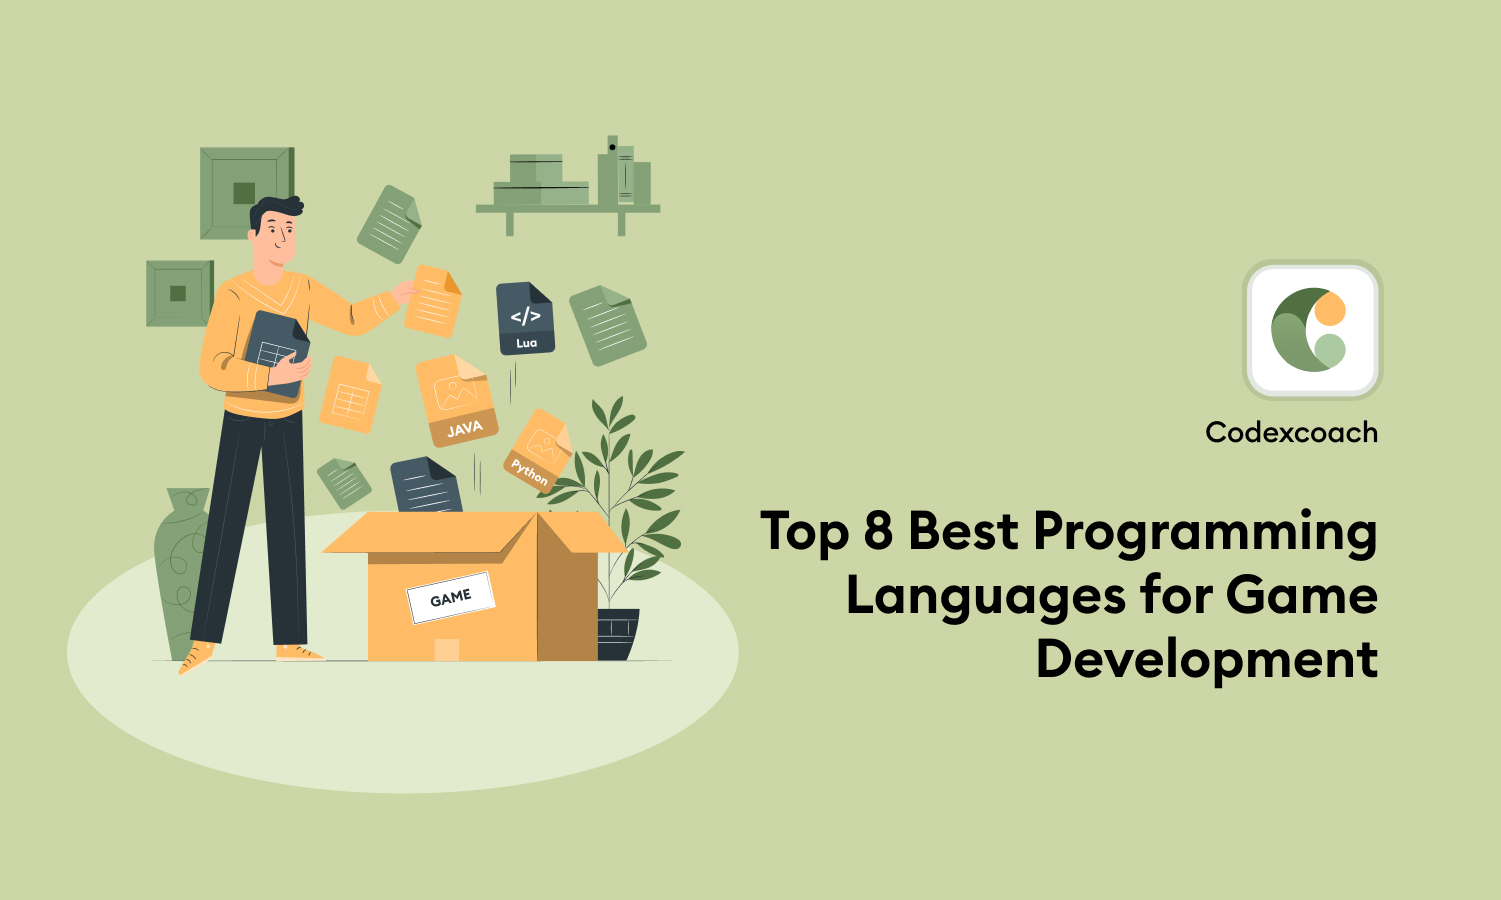 Top 8 Best Programming Languages for Game Development